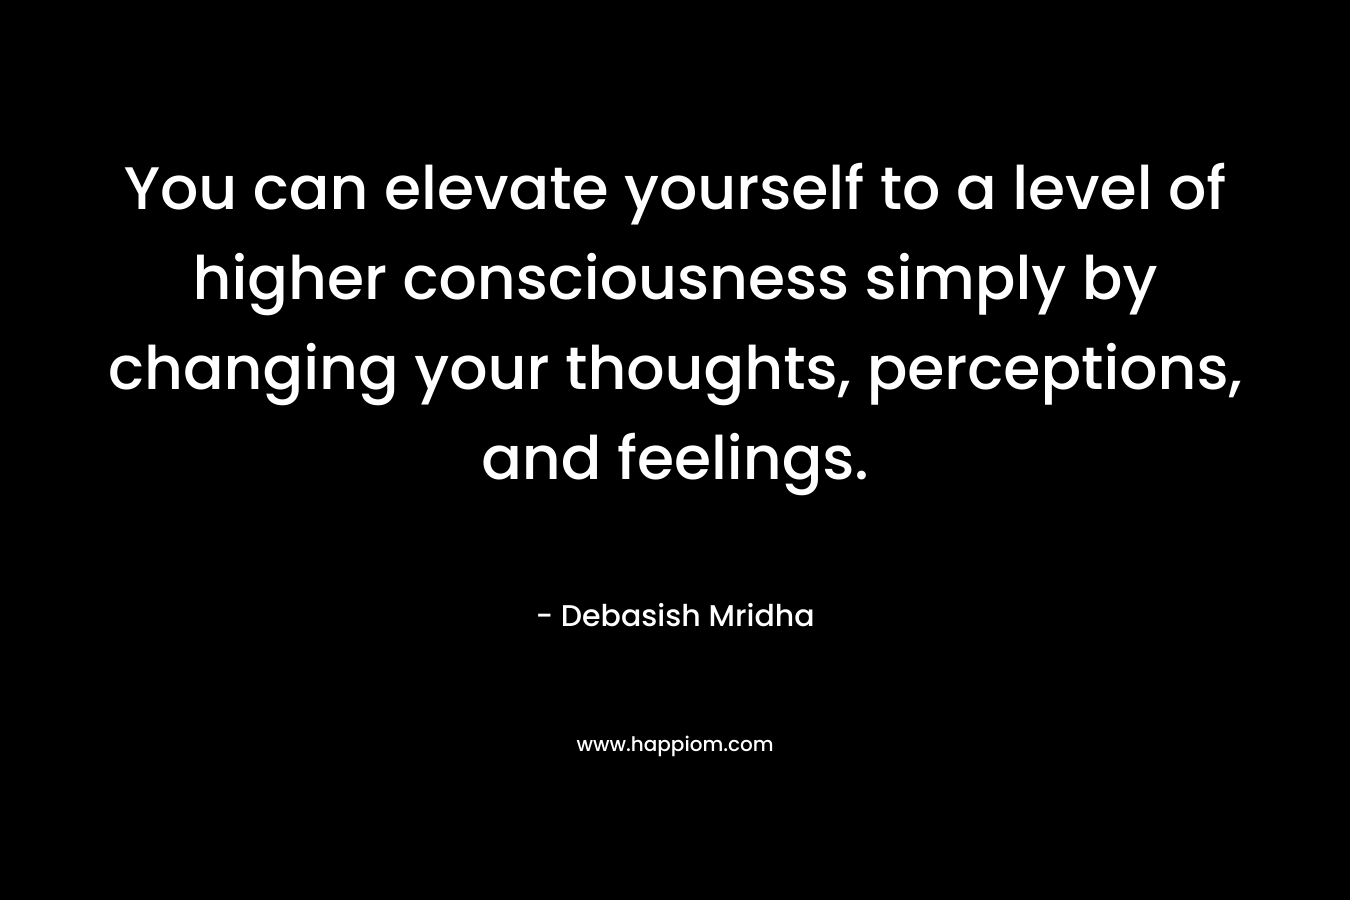 You can elevate yourself to a level of higher consciousness simply by changing your thoughts, perceptions, and feelings.